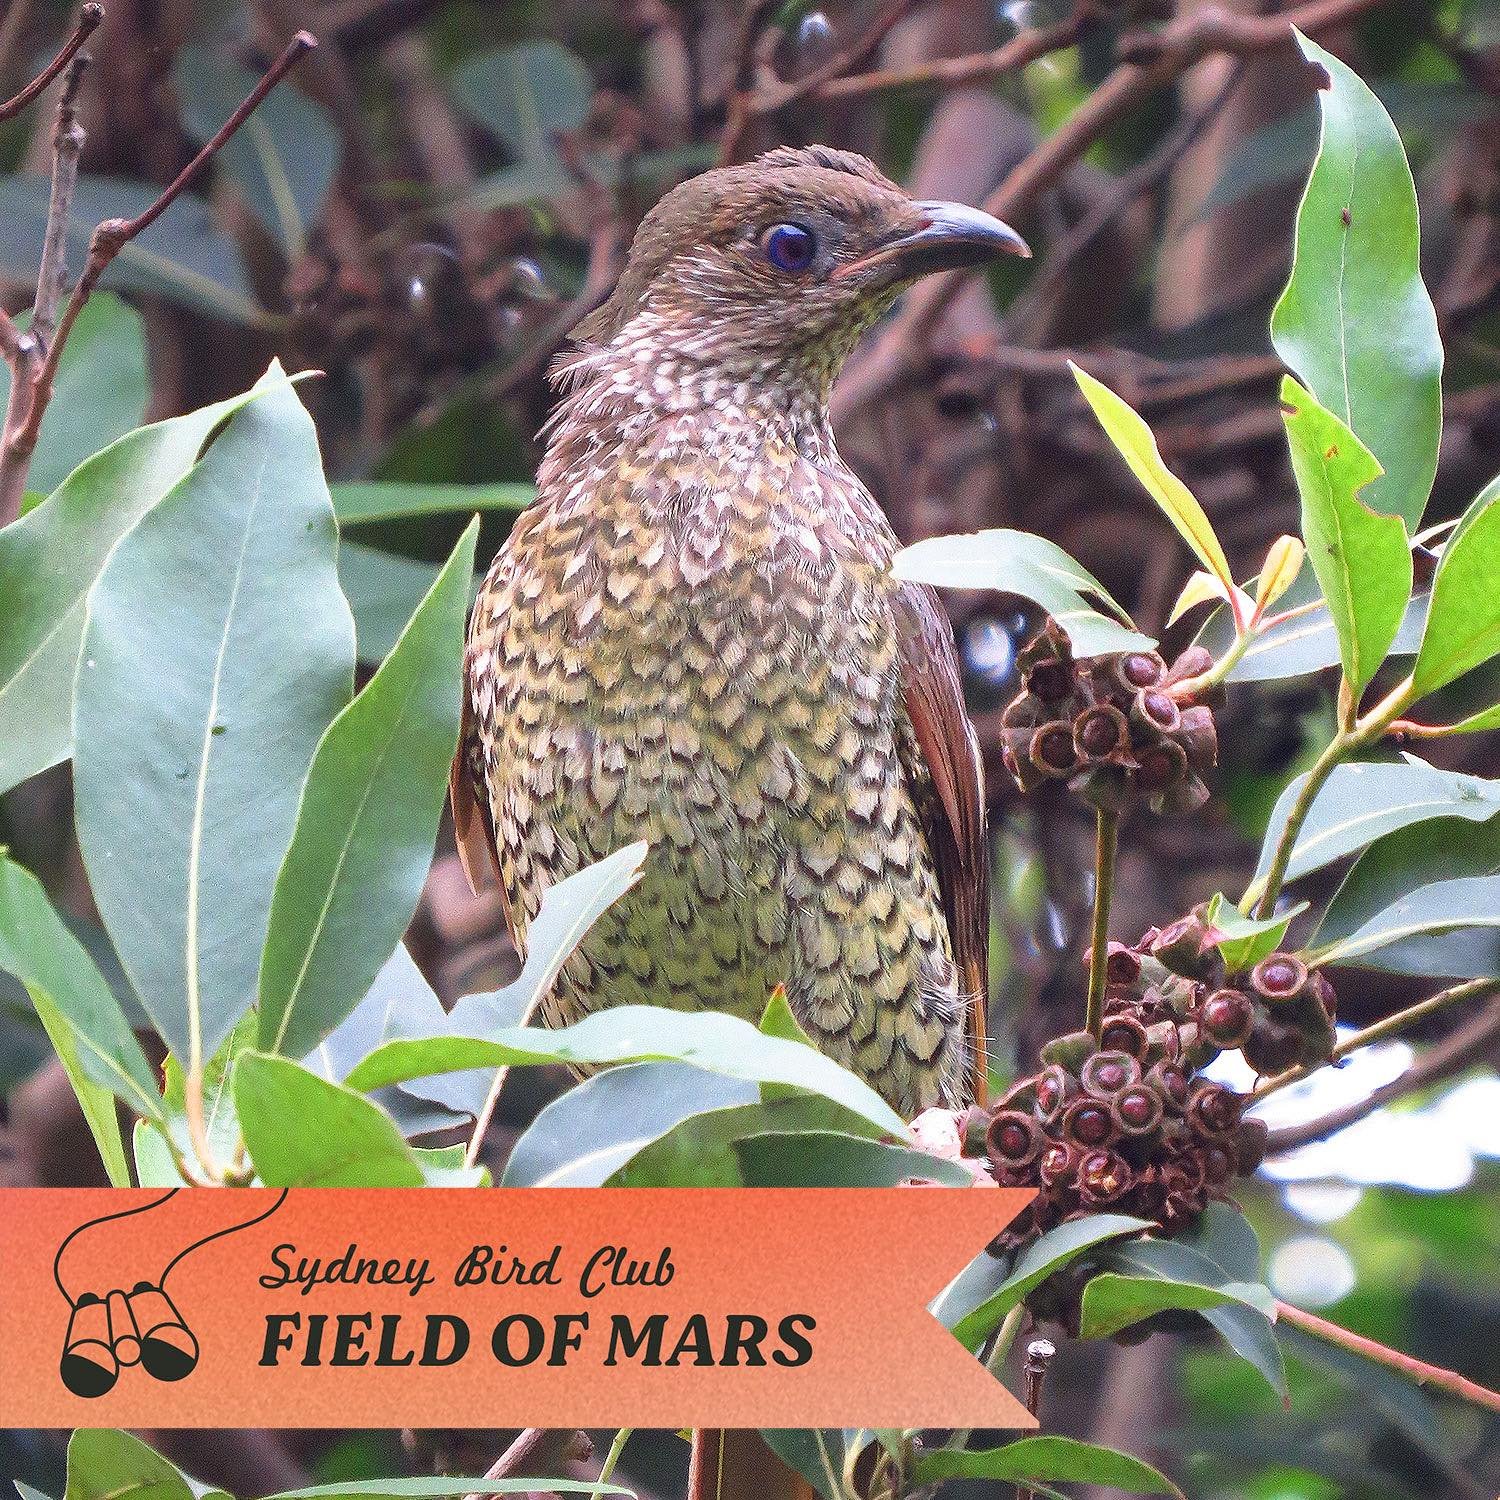 In the lead up to next weekend&rsquo;s walk I&rsquo;ll be sharing birds we might see at the Field of Mars Reserve 😊 

This is a juvenile Satin Bowerbird. I saw it in March alongside a female adult Satin Bowerbird 🪺 

Male and female immature Satin 